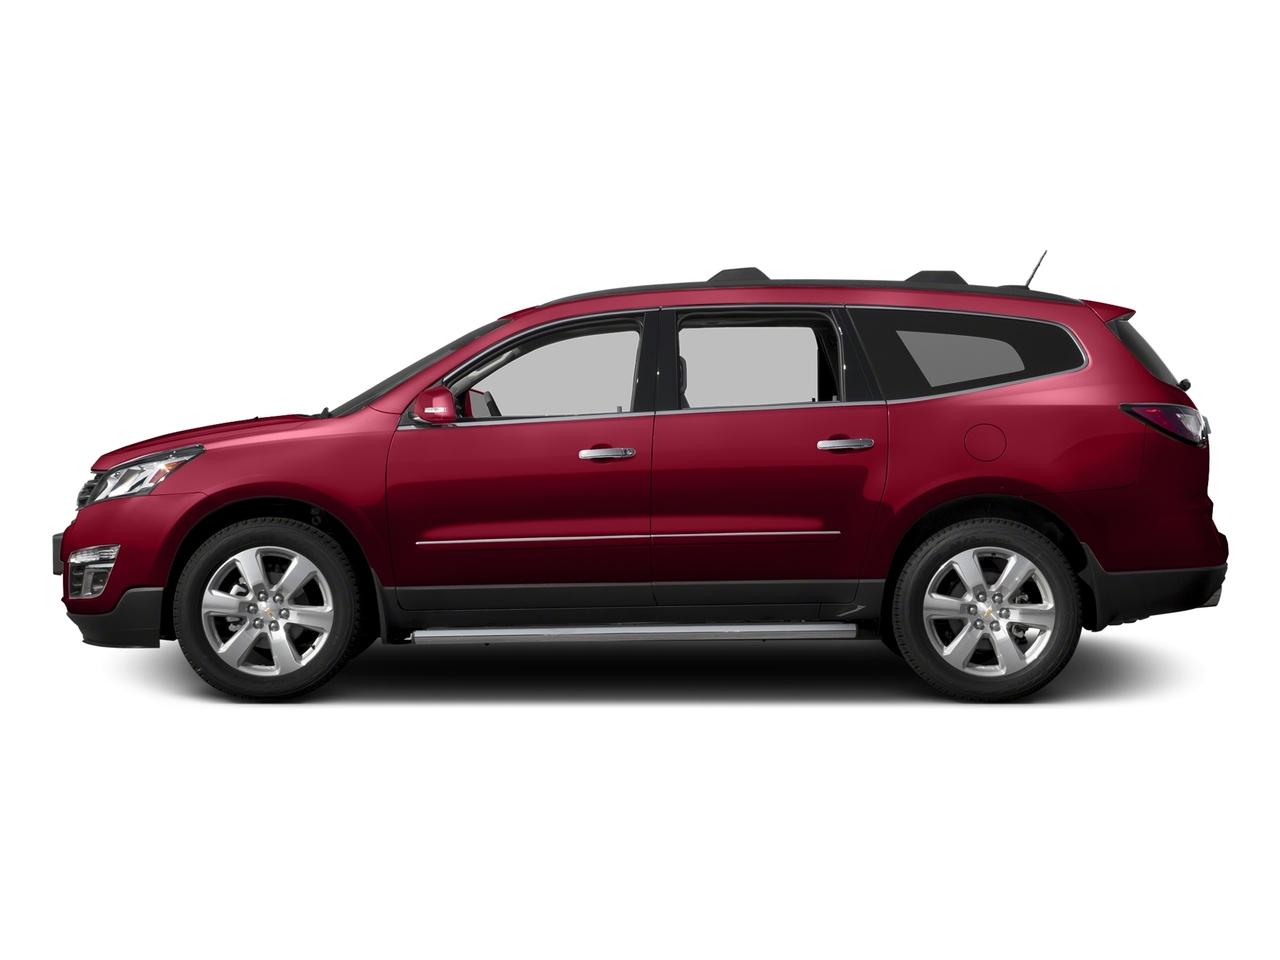 Used 2017 Chevrolet Traverse Premier with VIN 1GNKVJKD7HJ189940 for sale in Red Wing, Minnesota